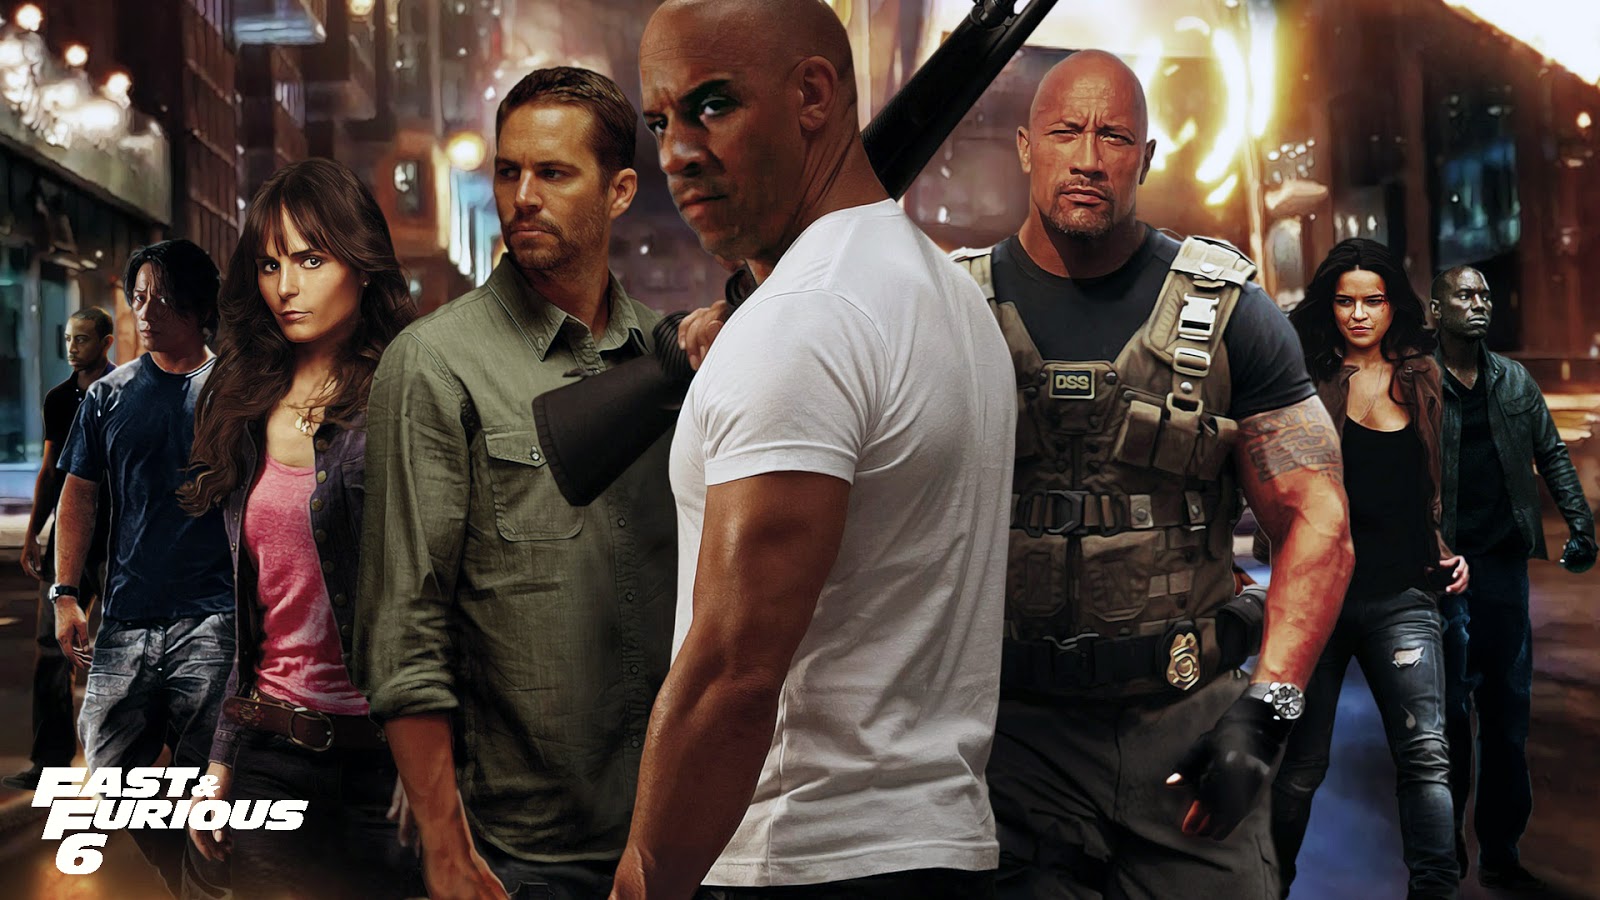 fast furious wallpaper,movie,action film,event,fictional character